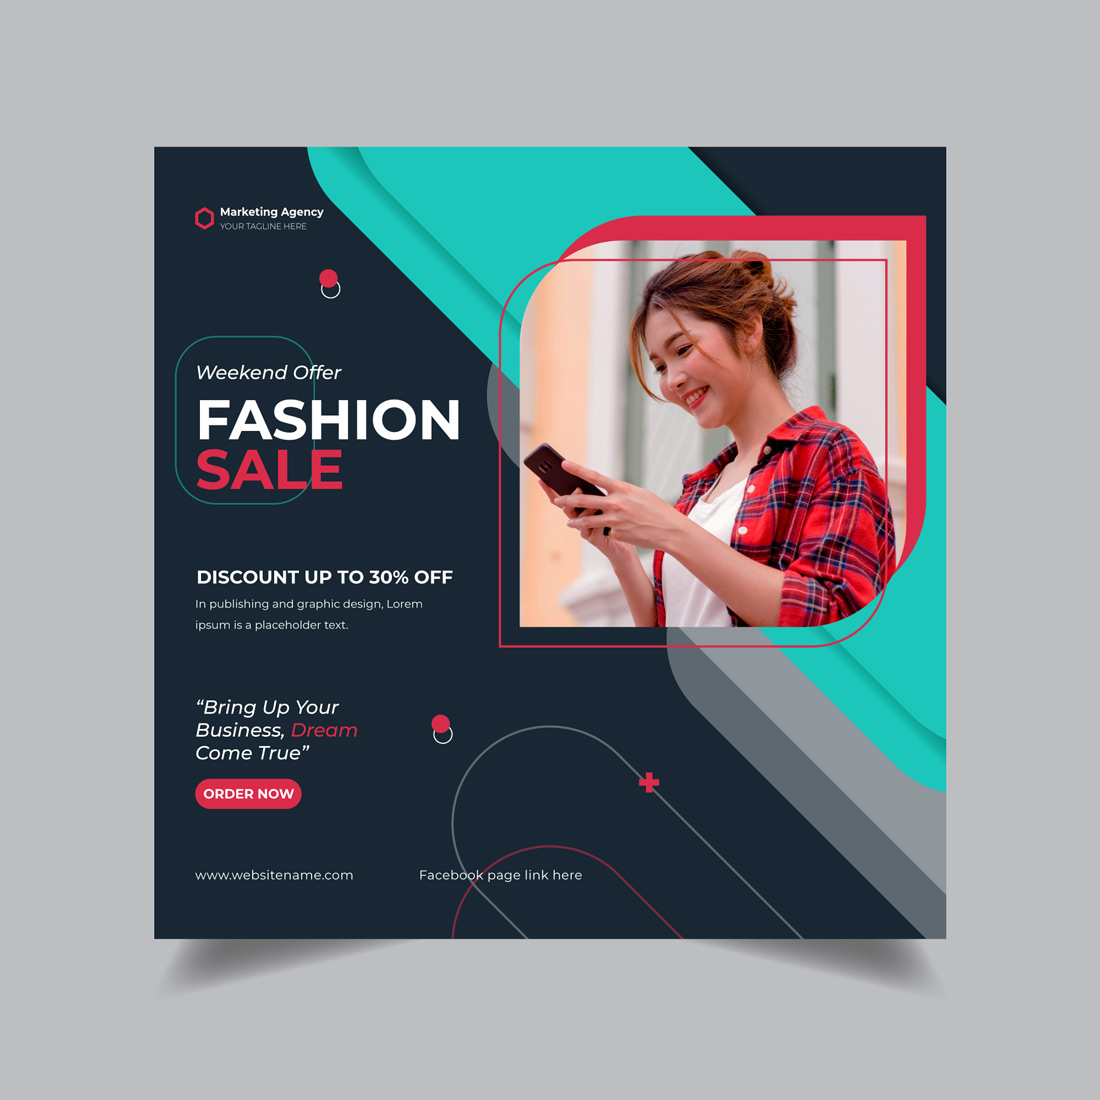 Flyer for a fashion sale with a woman holding a cell phone.